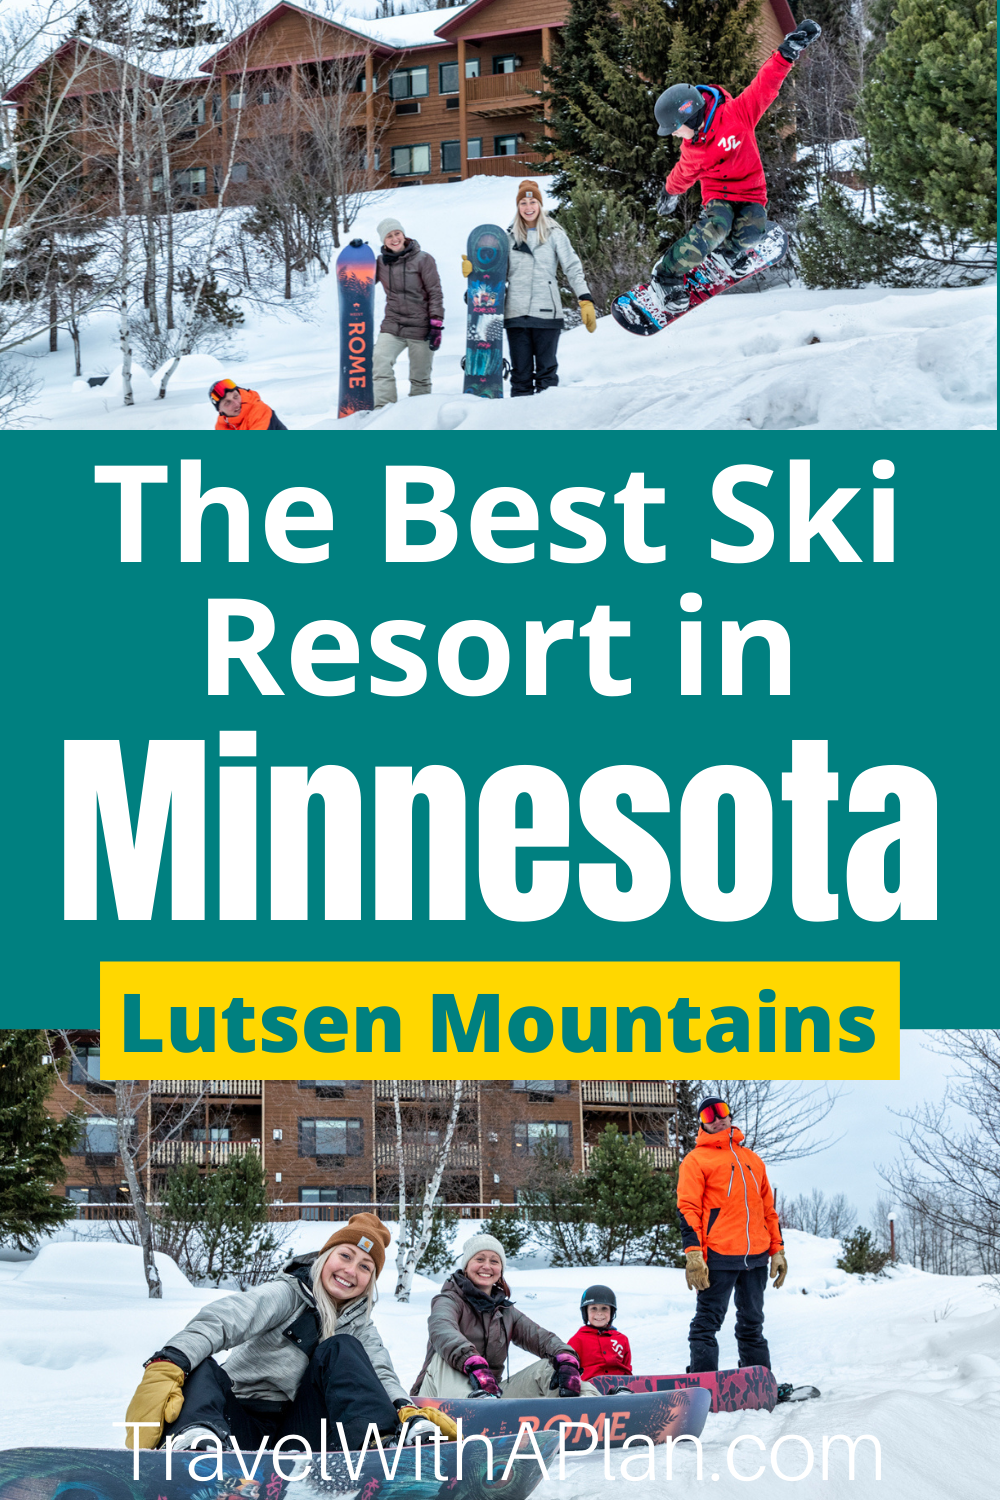 Looking for the best Midwest USA downshill skiing?  Lutsen Mountains Ski Resort is by far the best skiing in Minnesota and will become your family favorite!  Learn all about Lutsen and what to expect from Top U.S. travel blog, Travel With A Plan.  #skiinginMinnesota #Lutsen #Minnesotaskiing #snowboardinginMinnesota #winteractivities #bestplacestoski